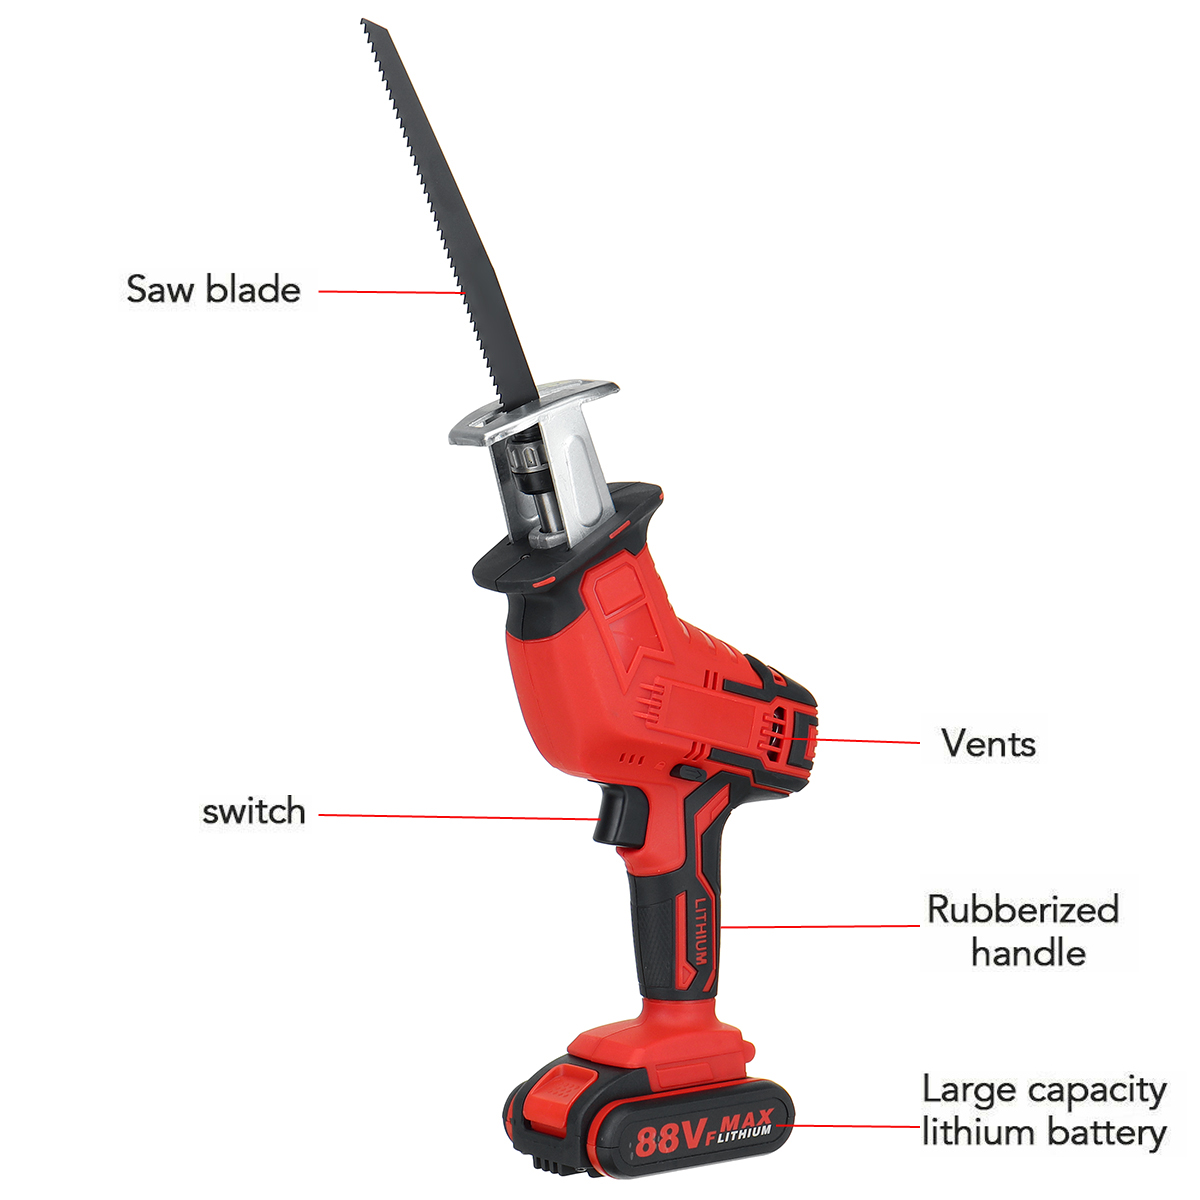 88VF-Electric-Reciprocating-Saws-Outdoor-Woodworking-Cordless-Portable-Saw-With-Blade-1721109-6